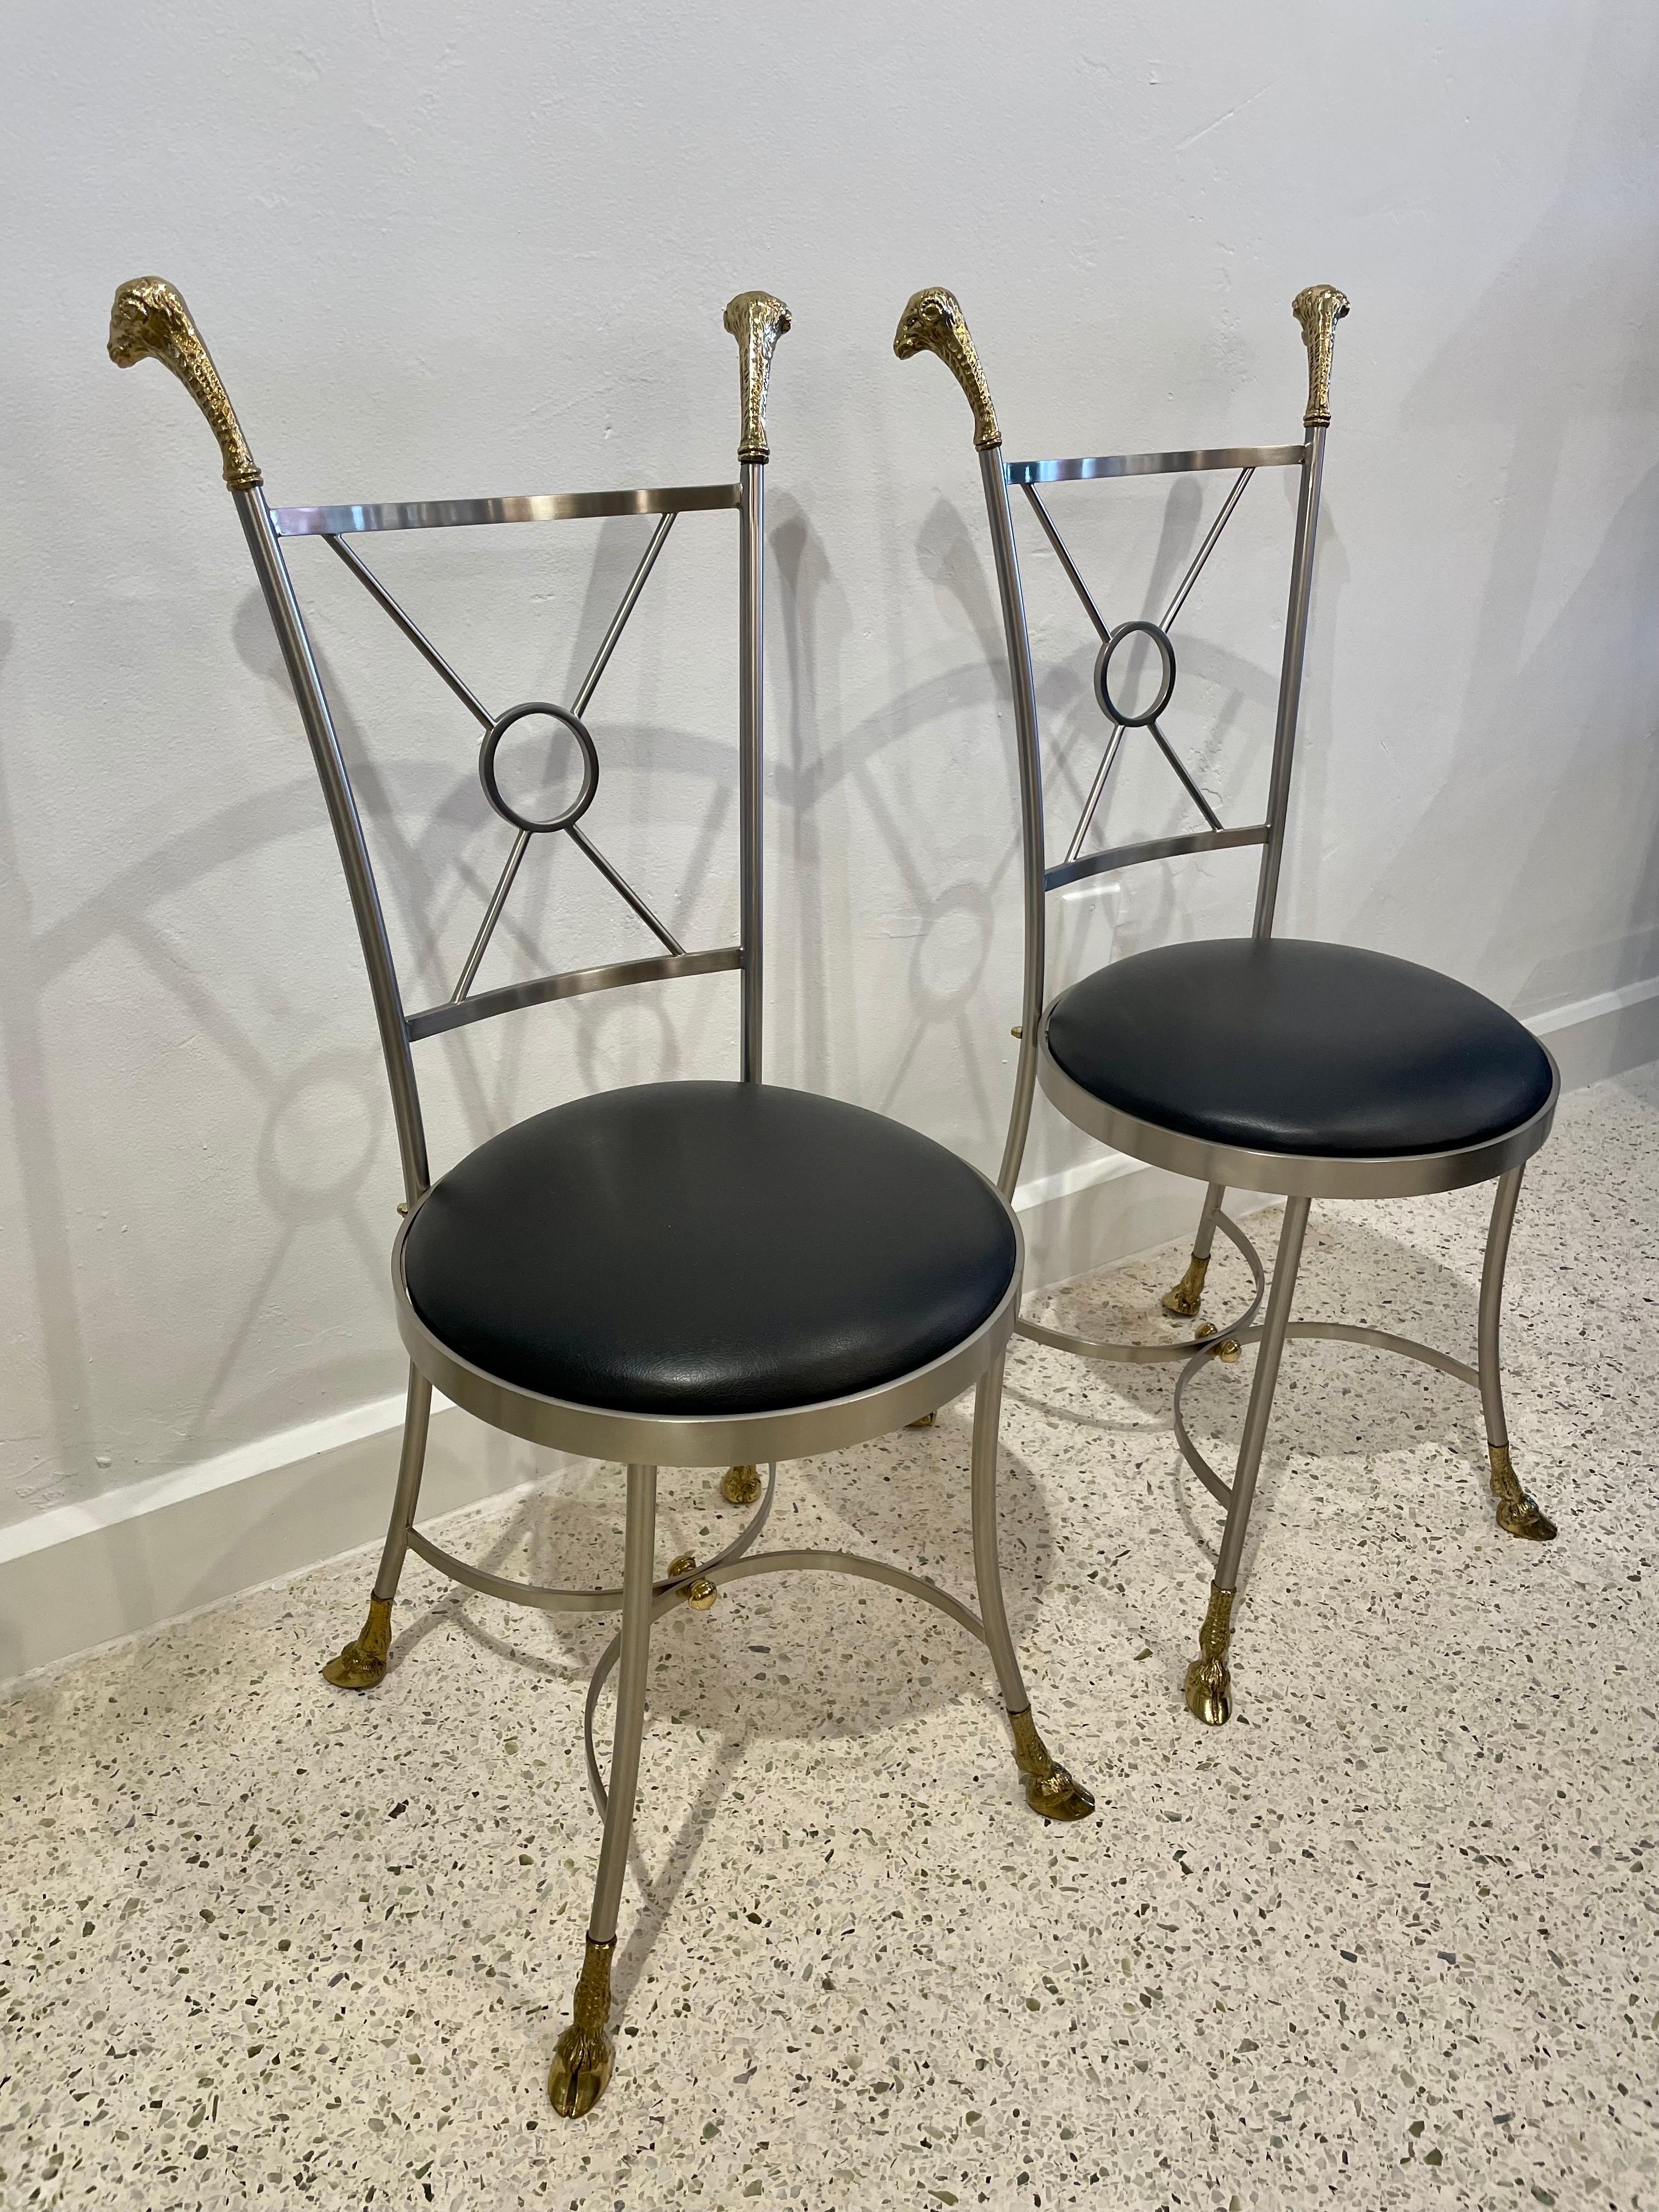 Mixed-metal (brushed steel and brass), these chairs with rams head finials and hooved feet, are newly upholstered in black leather. Made in Italy 1970's, likely by Maison Jansen, these heavy chairs are in amazing condition.